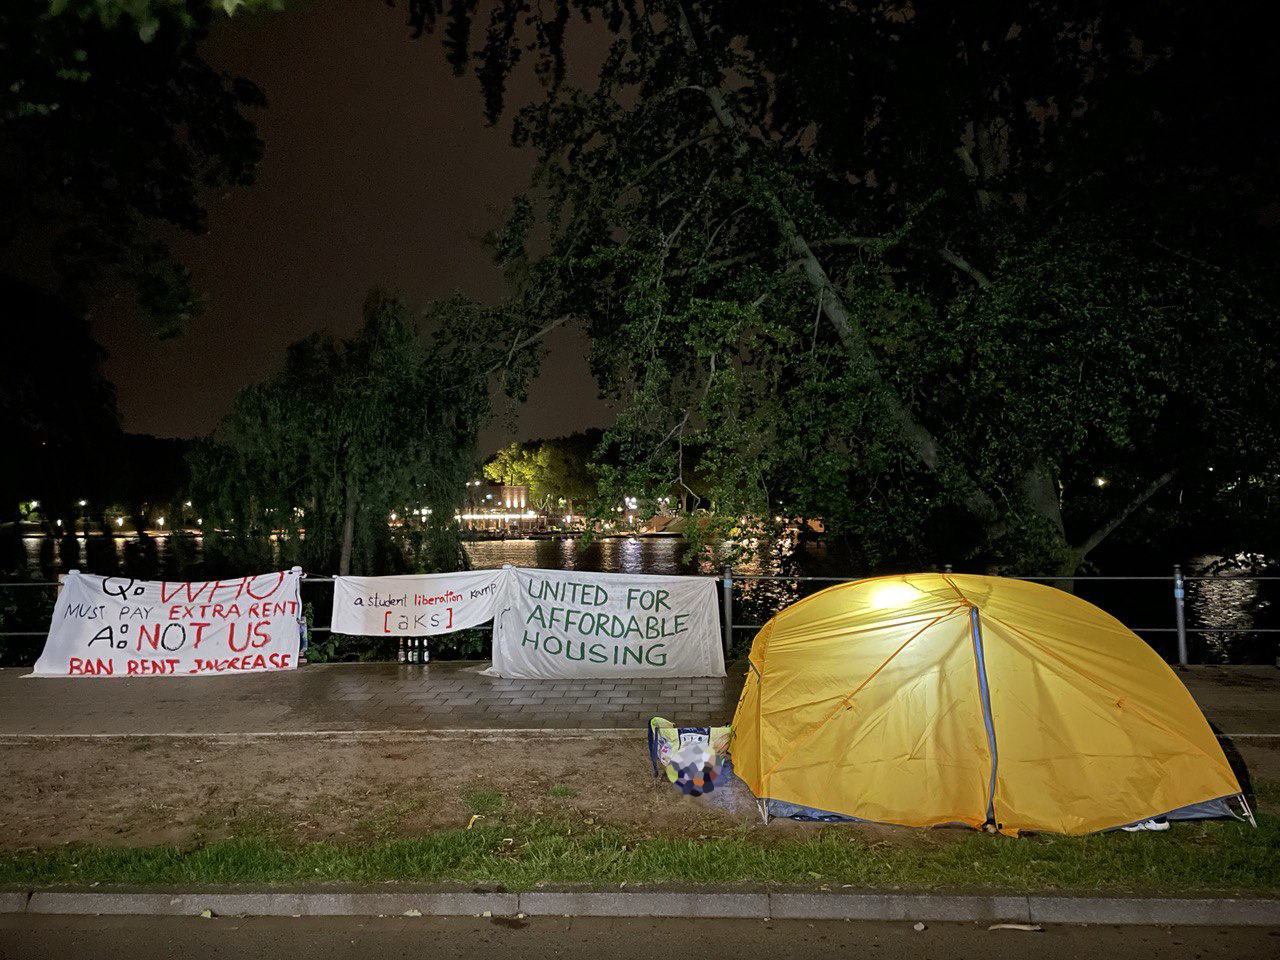 a symbolic action by living in tents in front of Studieredenwerk office on 31st May 2022..